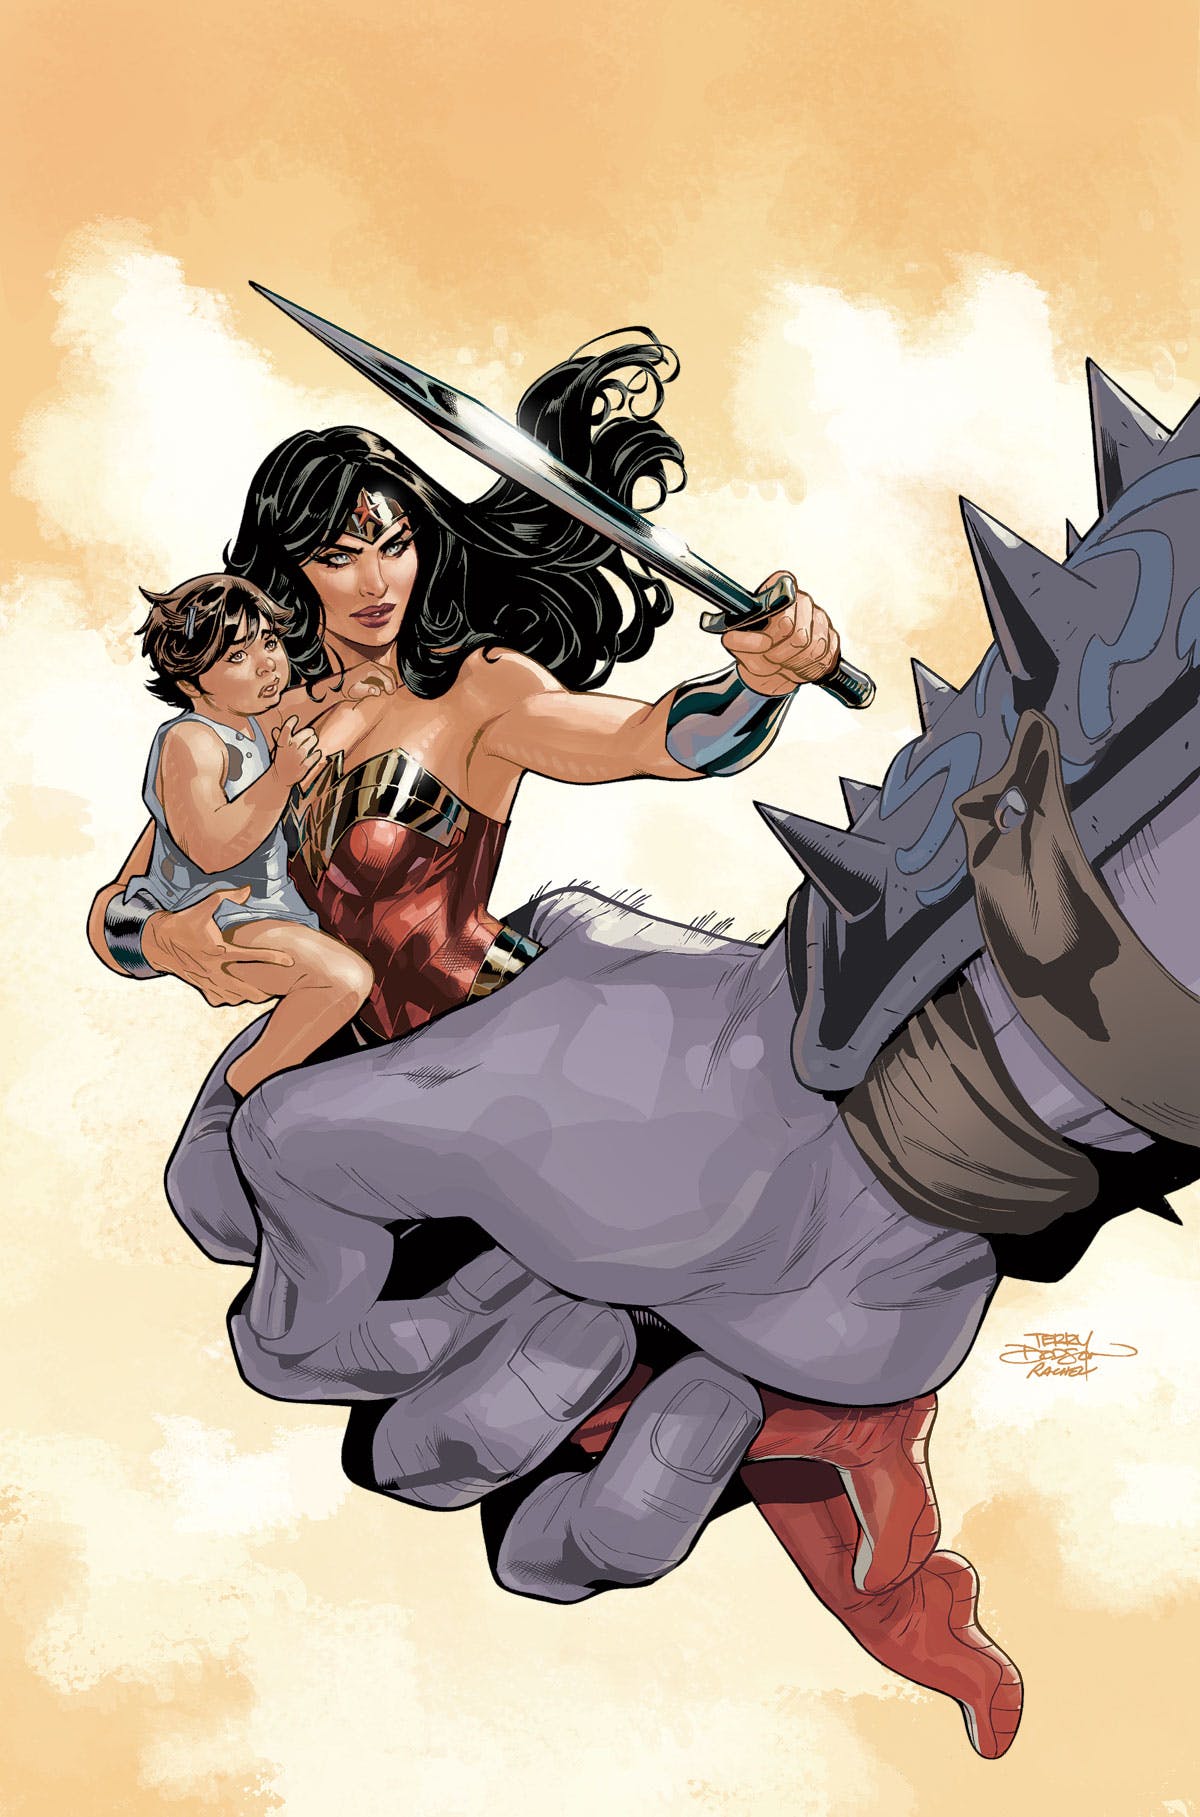 Wonder Woman #60 review: Love and war